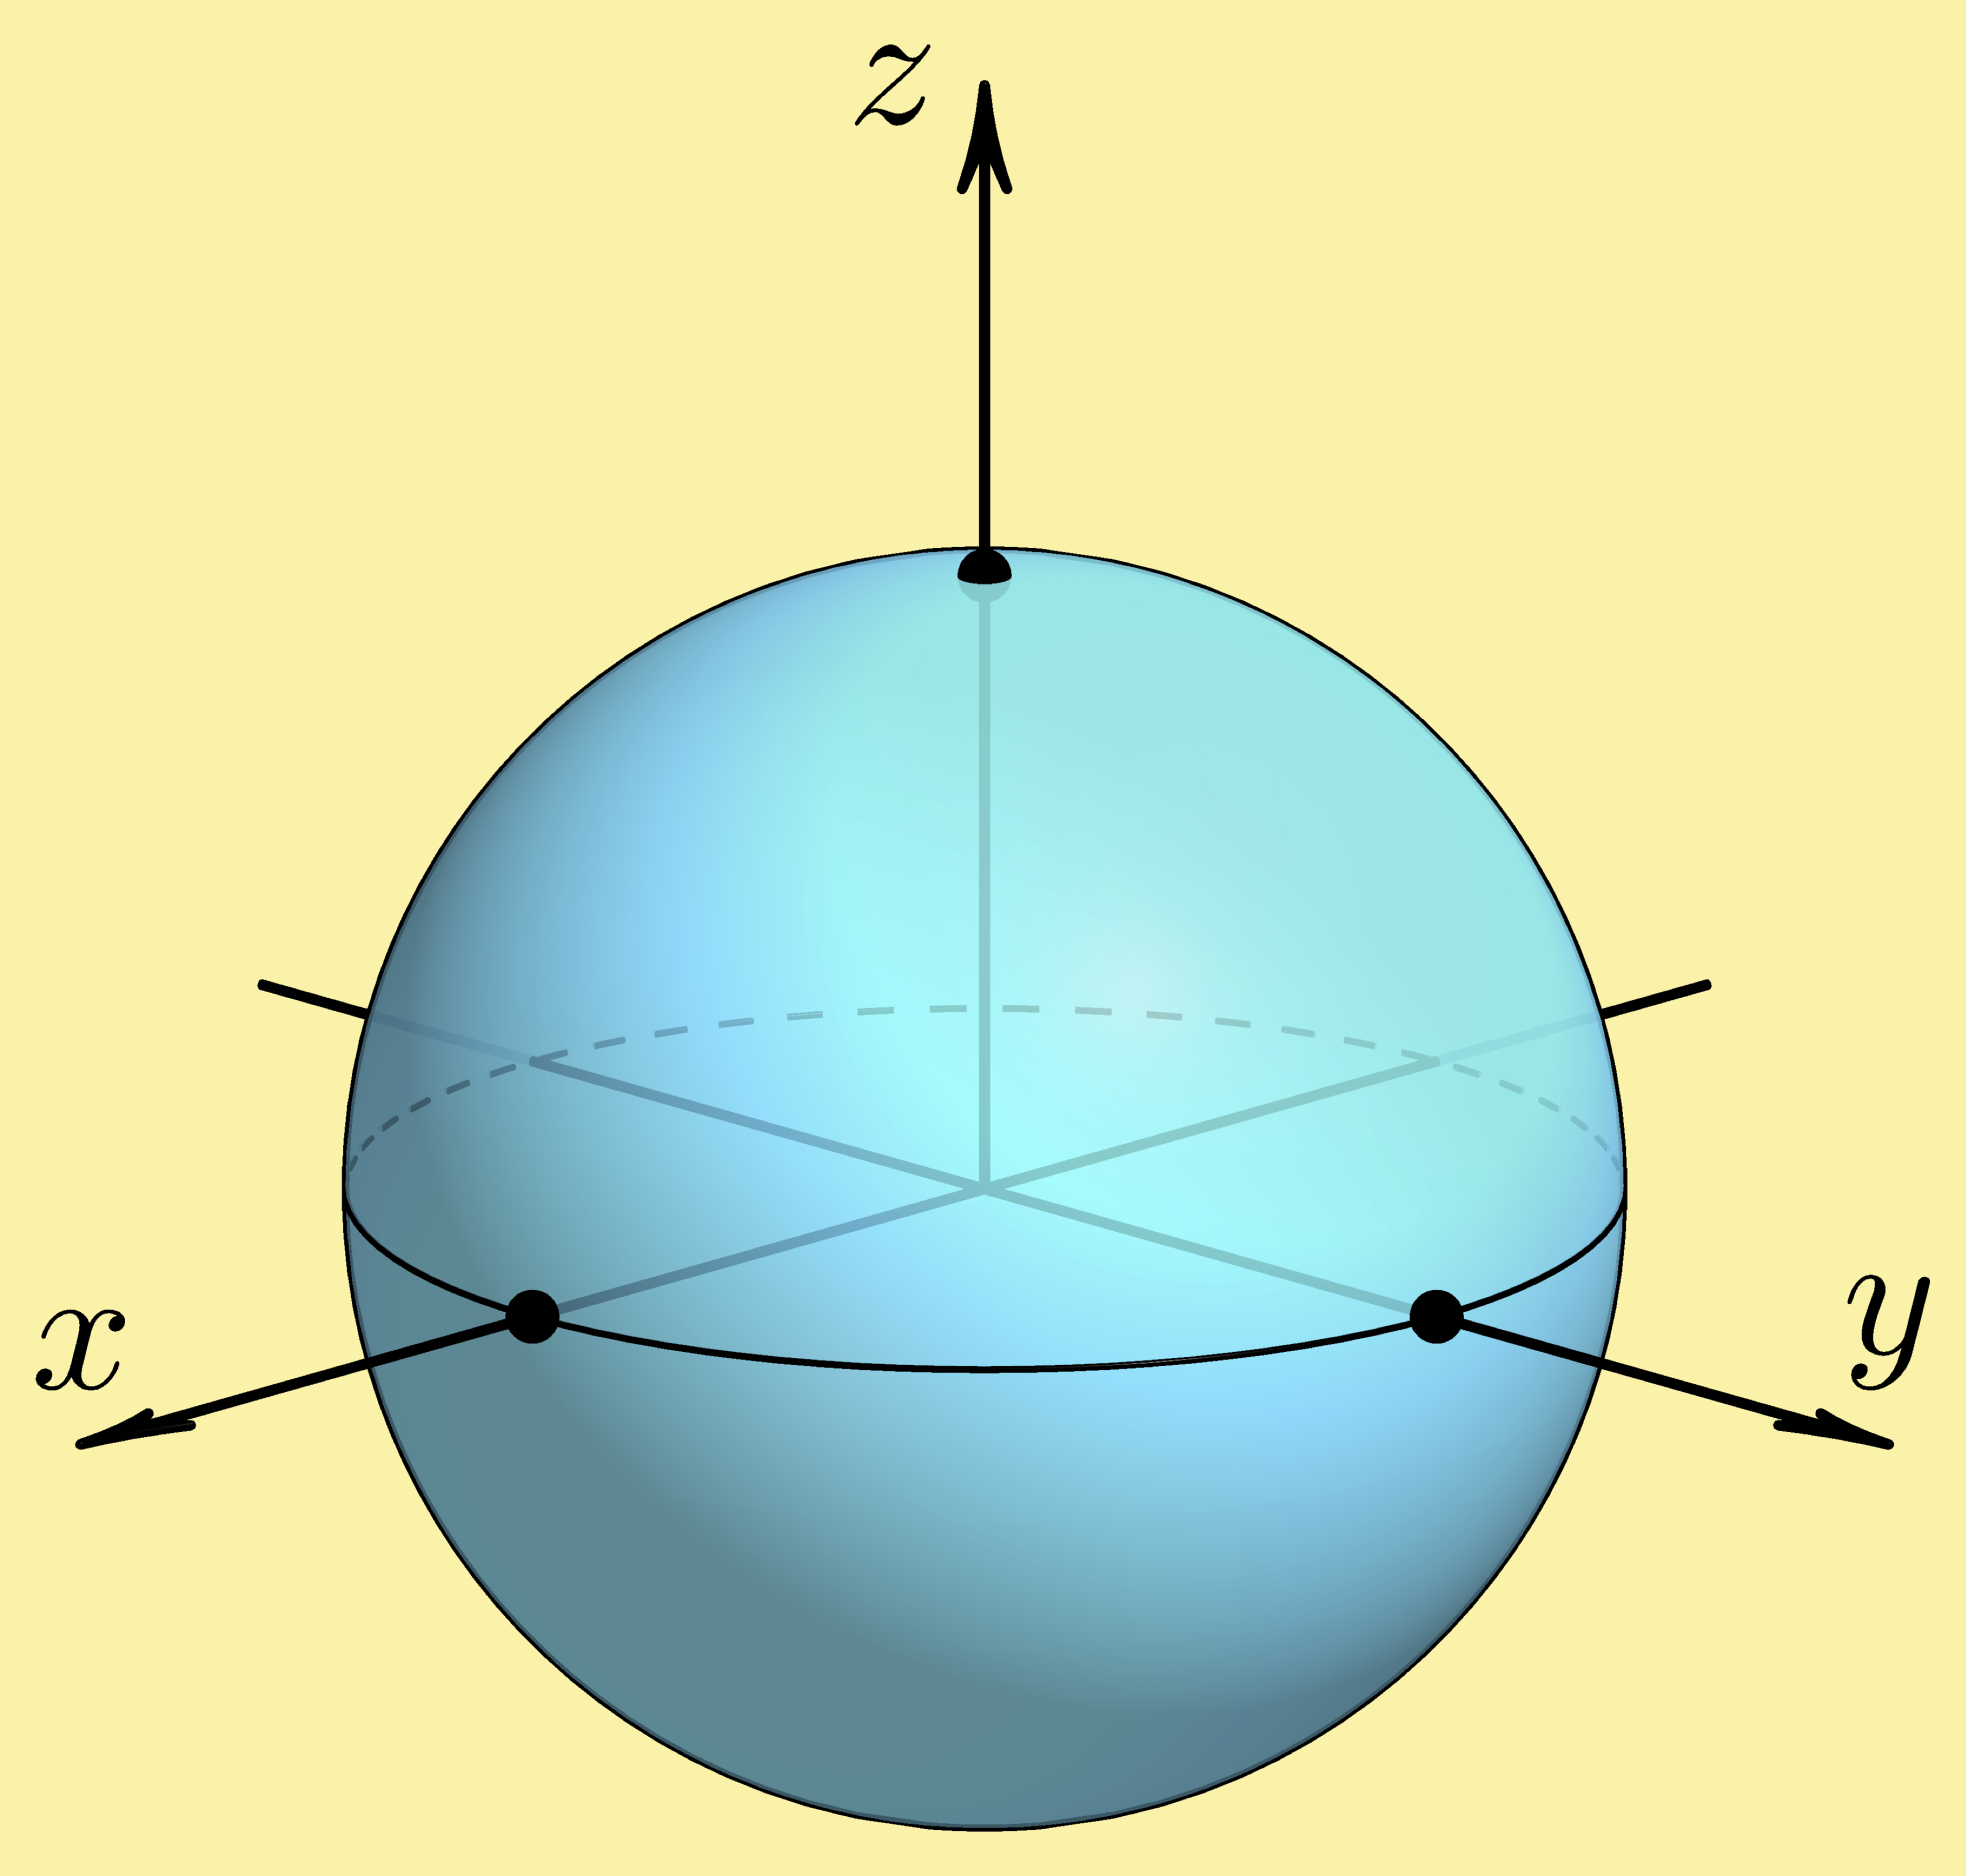 sphere 3-space coordinate system xyz R3 Cartesian three-space